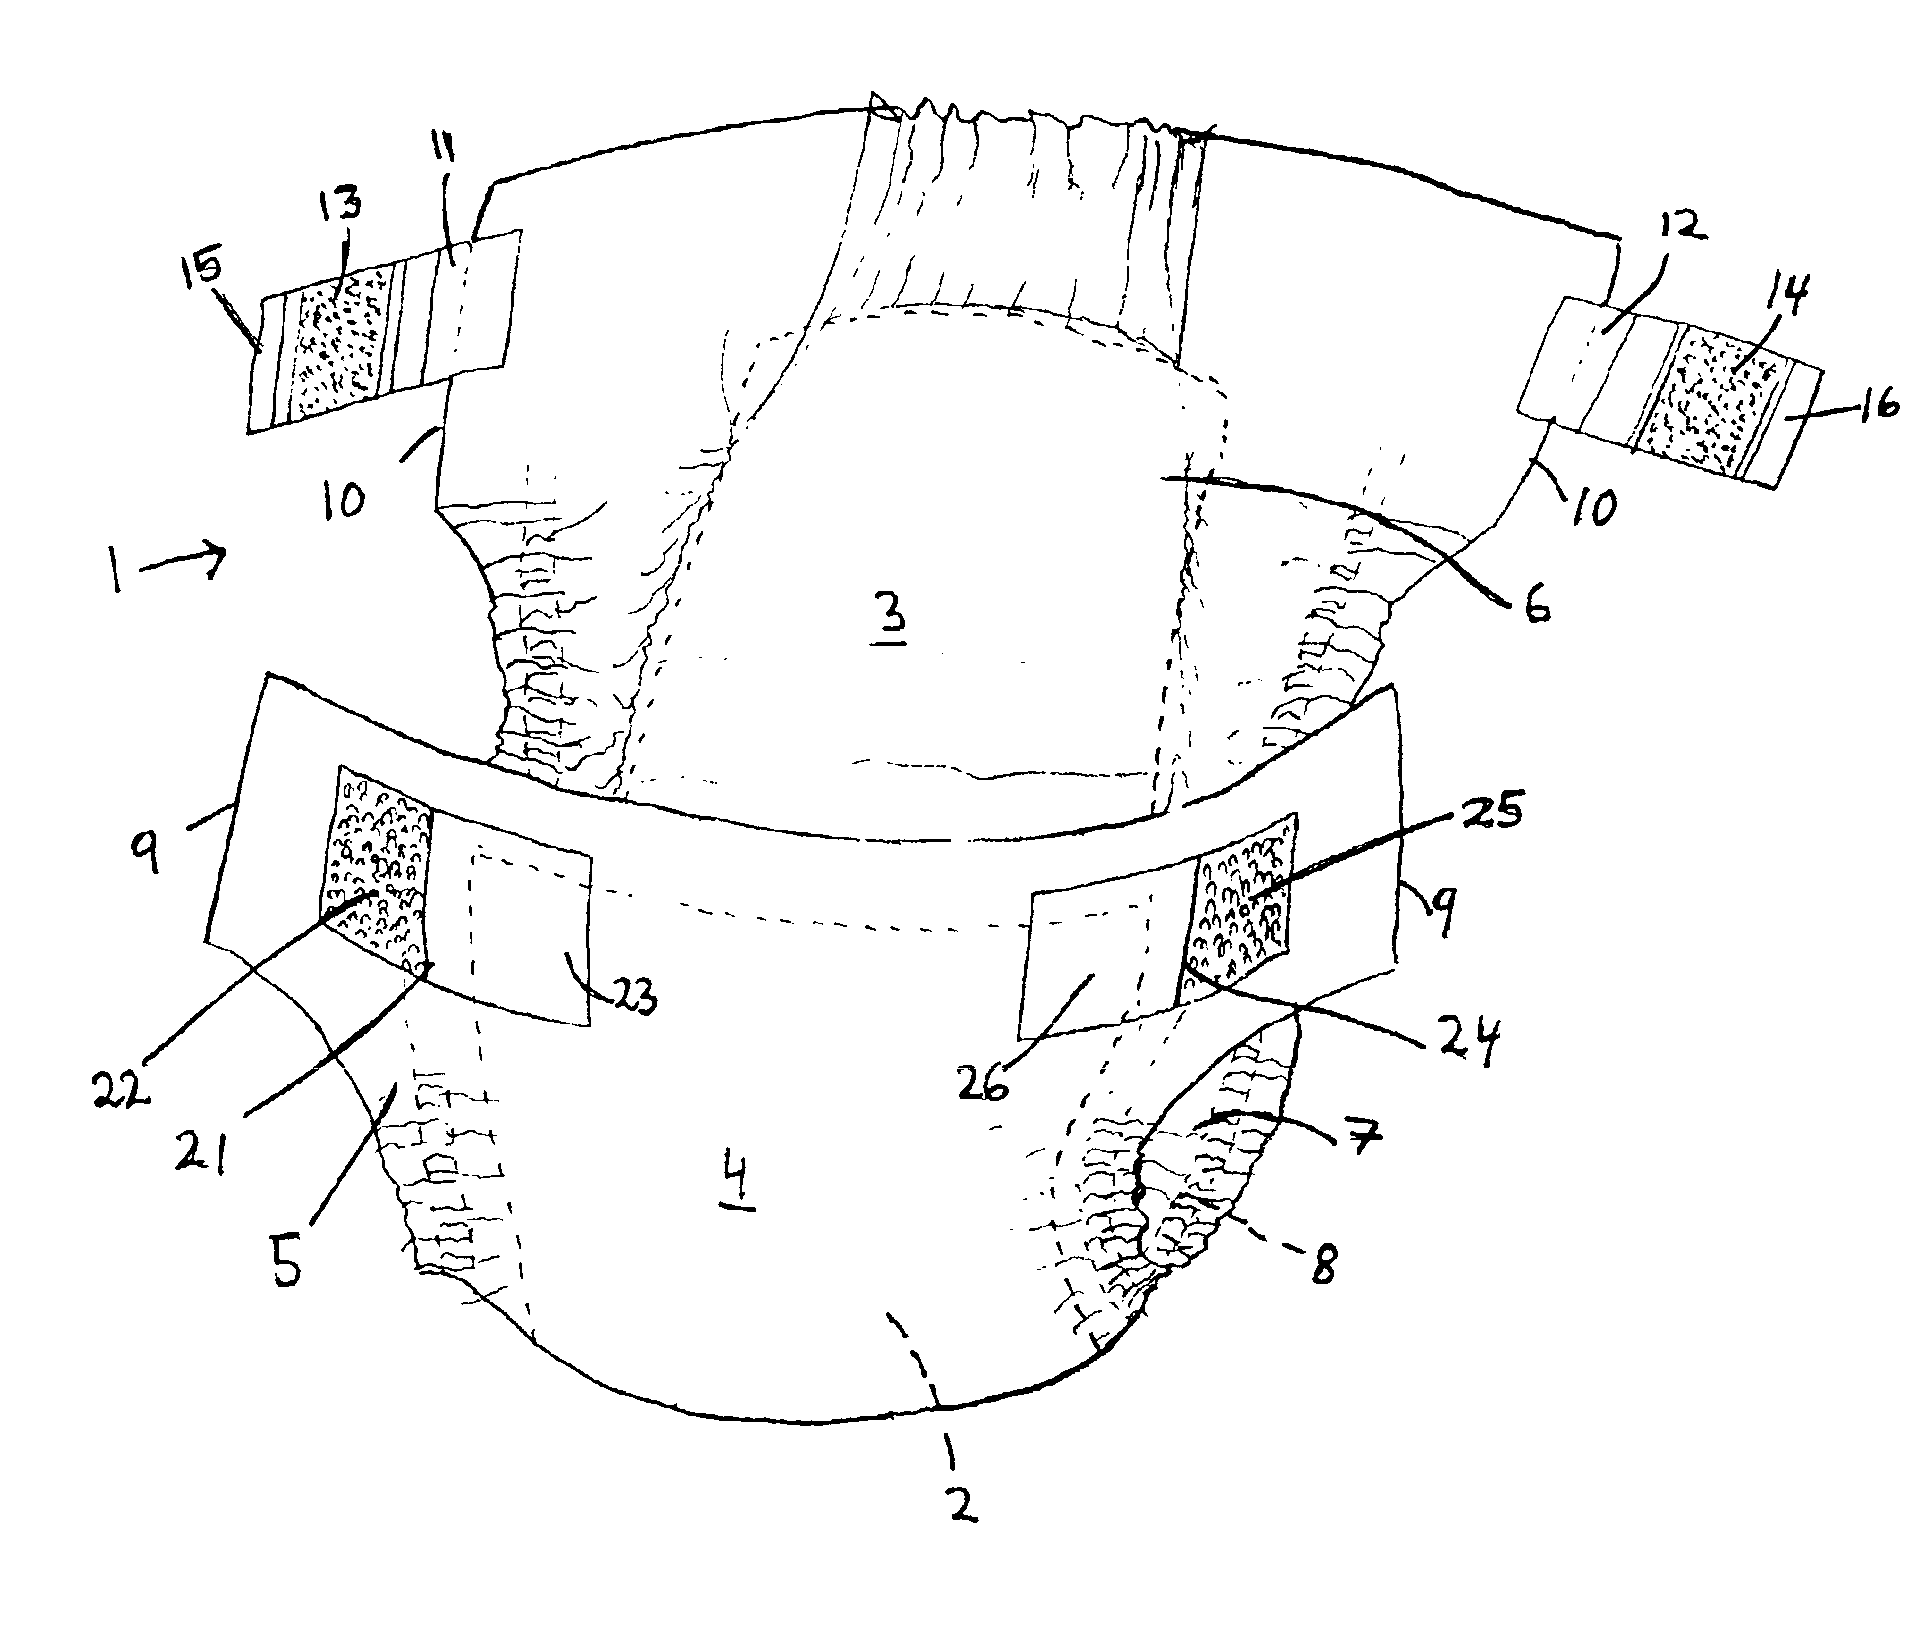 Fastening system for an absorbent product